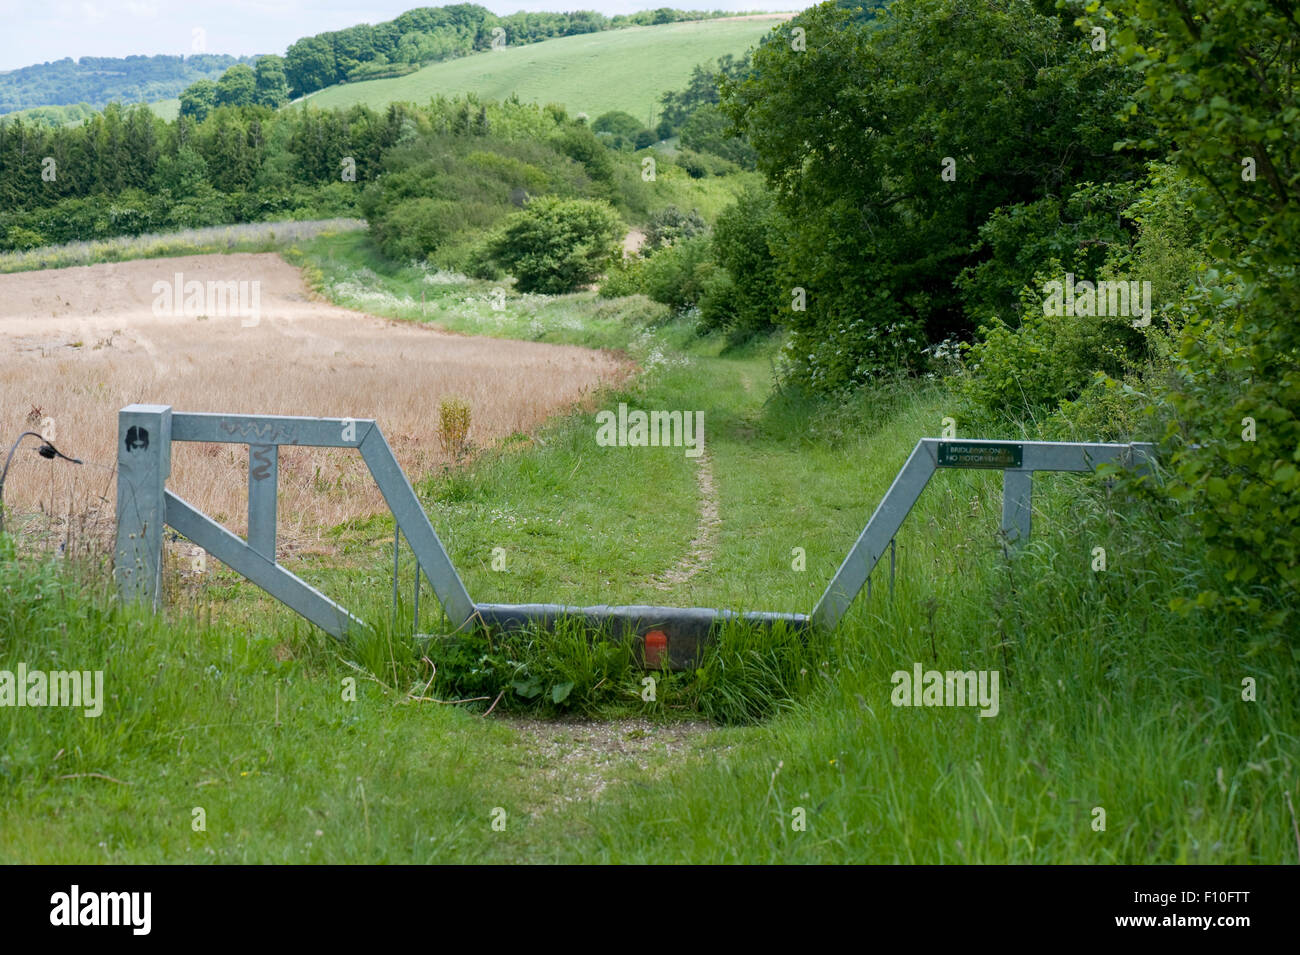 A metal vehicle barrier gate with a low centre section for riders on a bridleway on the Wessex Downs near West Woodhay, Berkshir Stock Photo